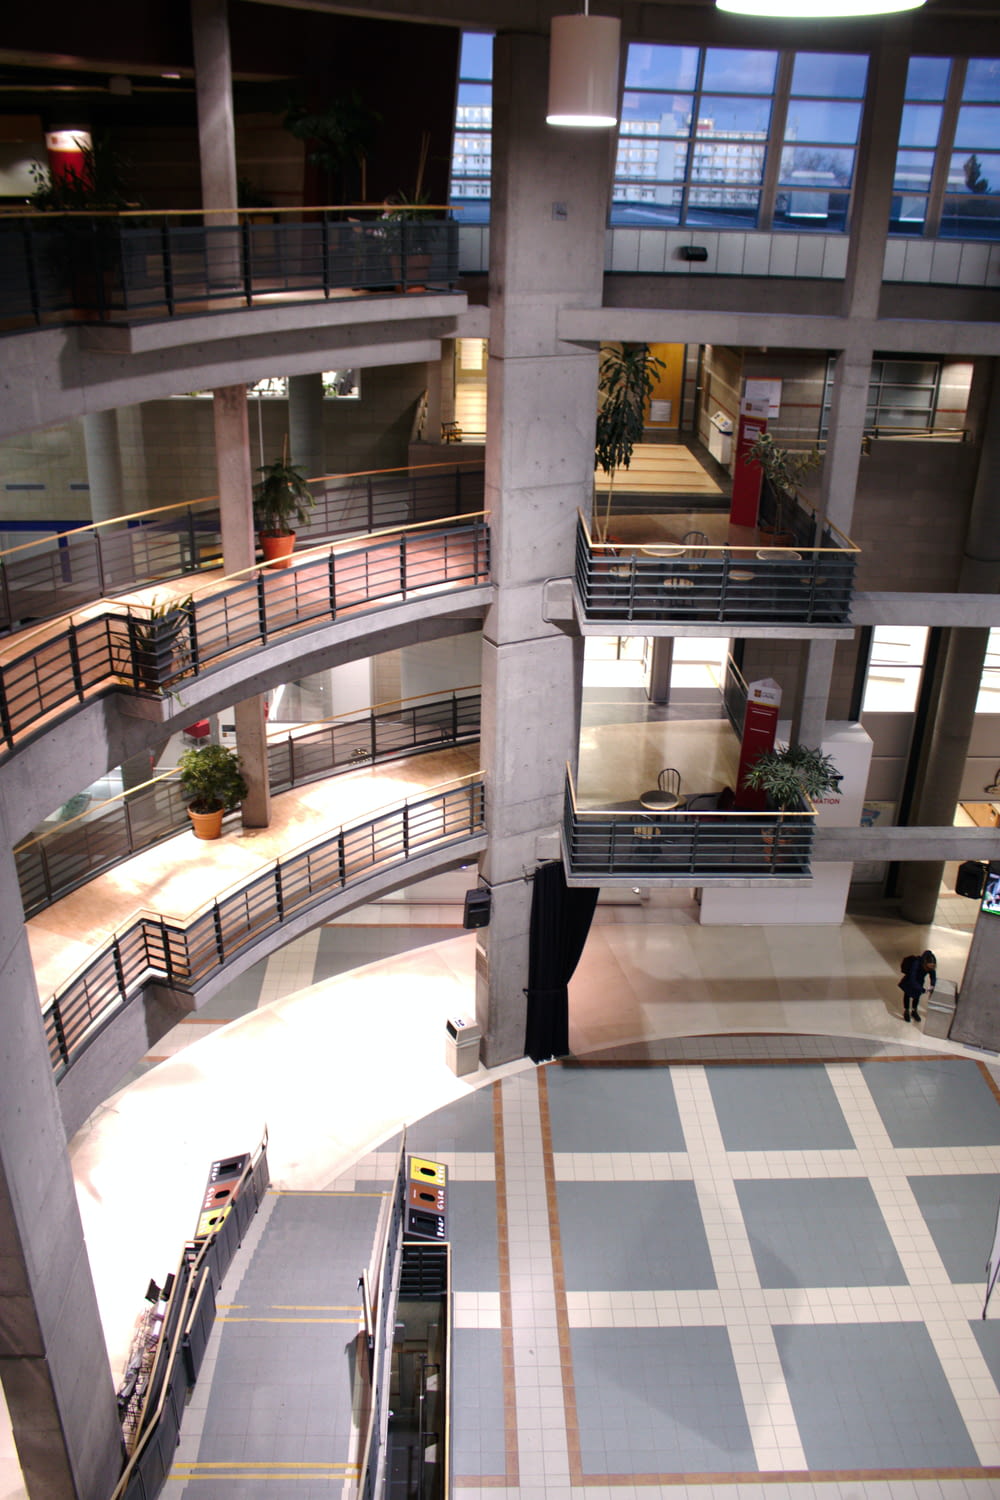 a view of a building from the second floor